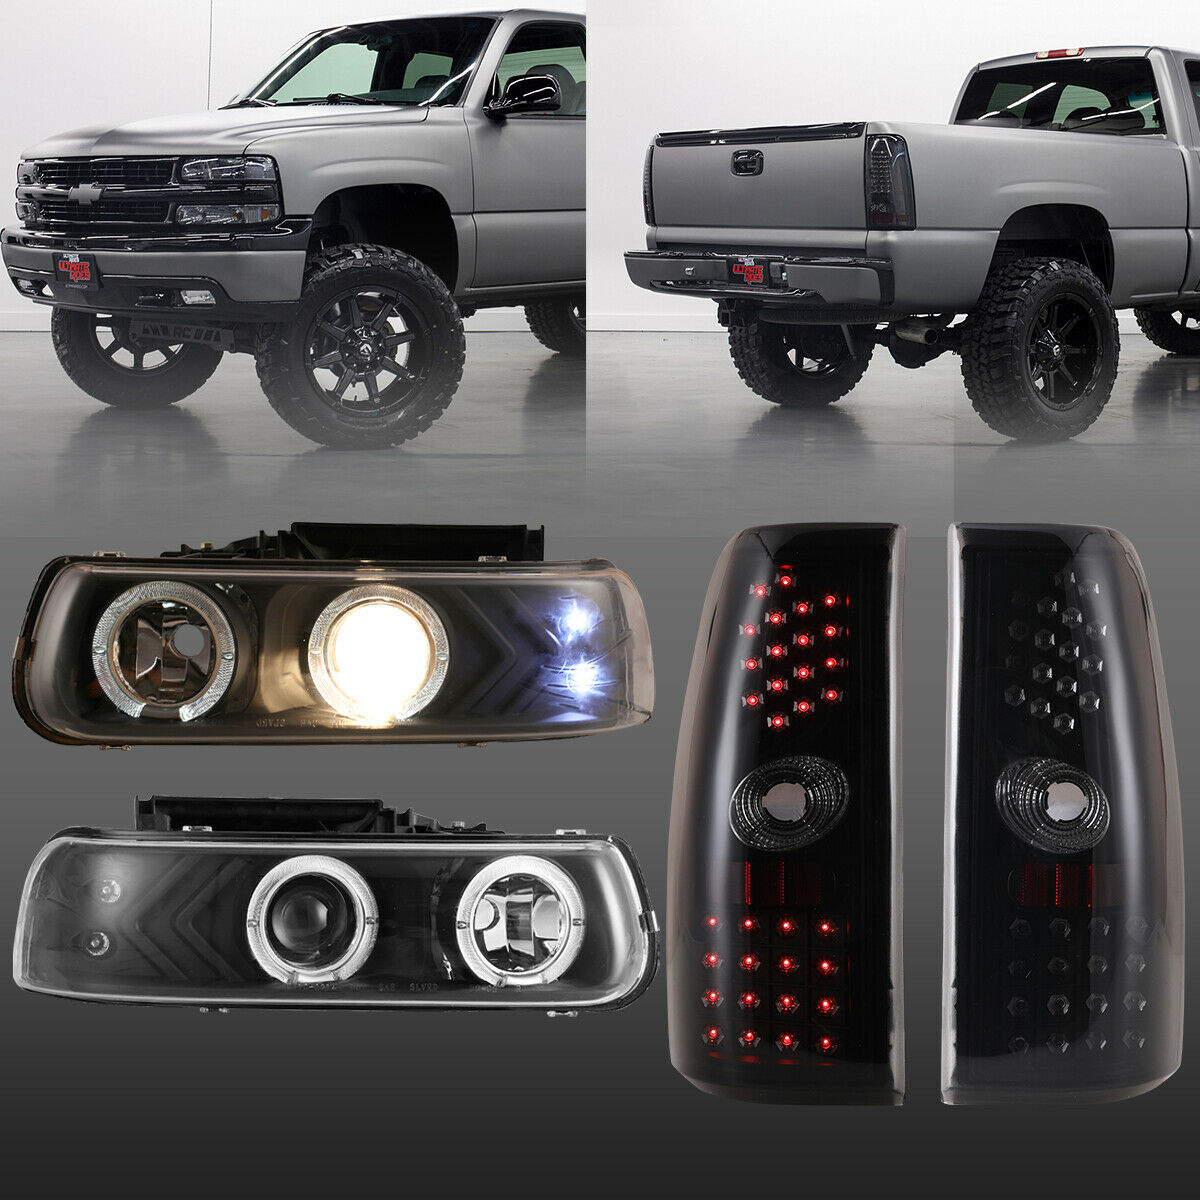 Black Housing Aftermarket LED Head & Tail Lights for 1999-2002